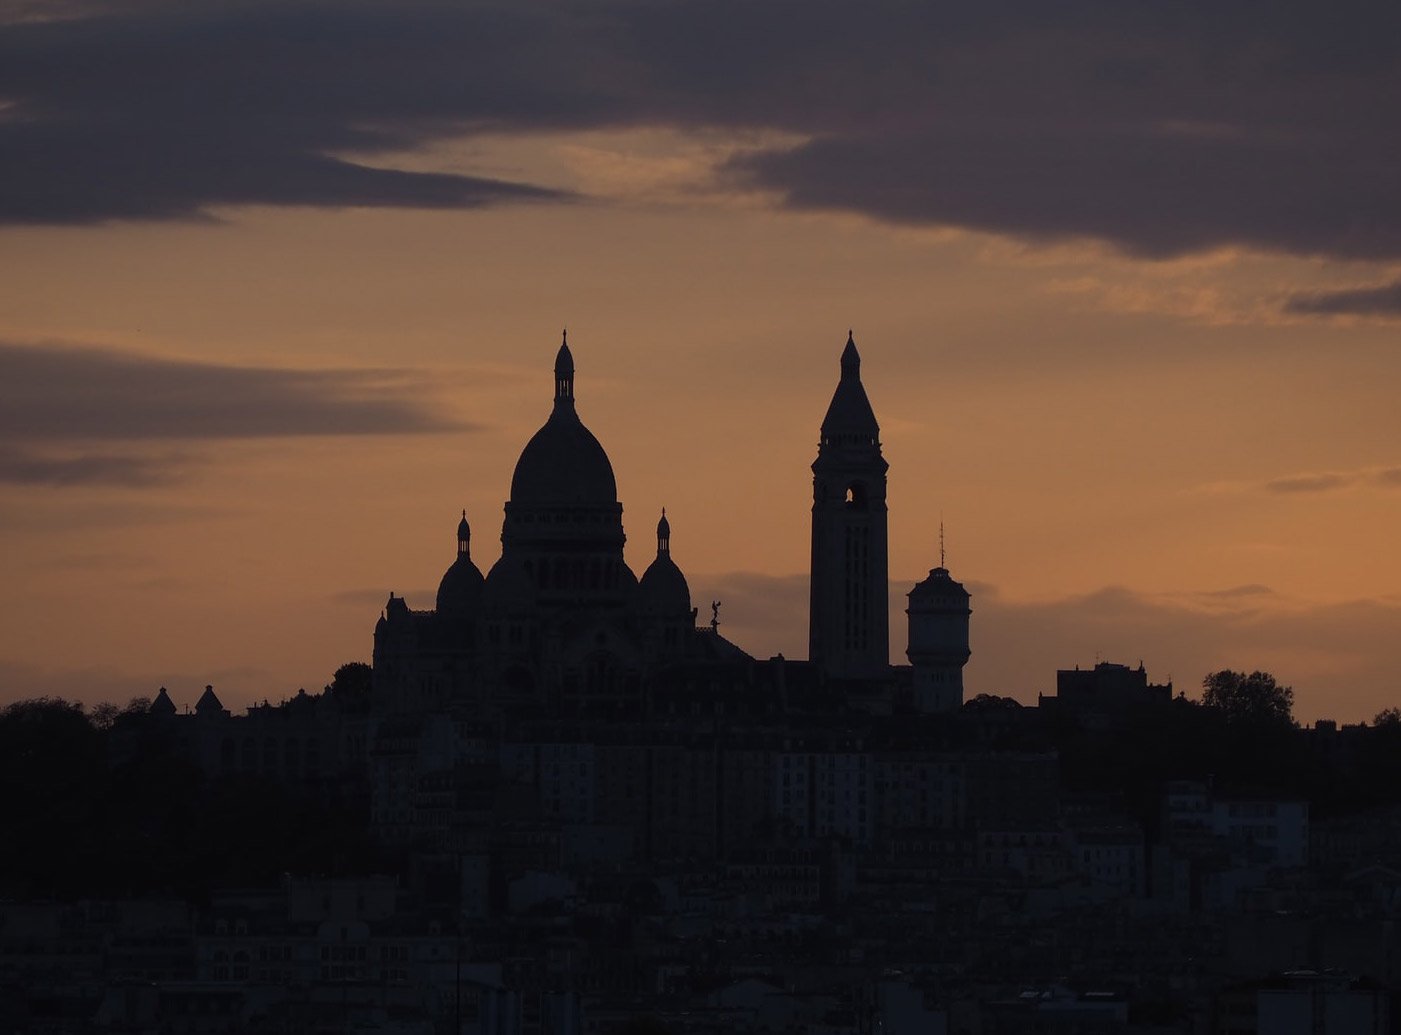 montmartre at sunset